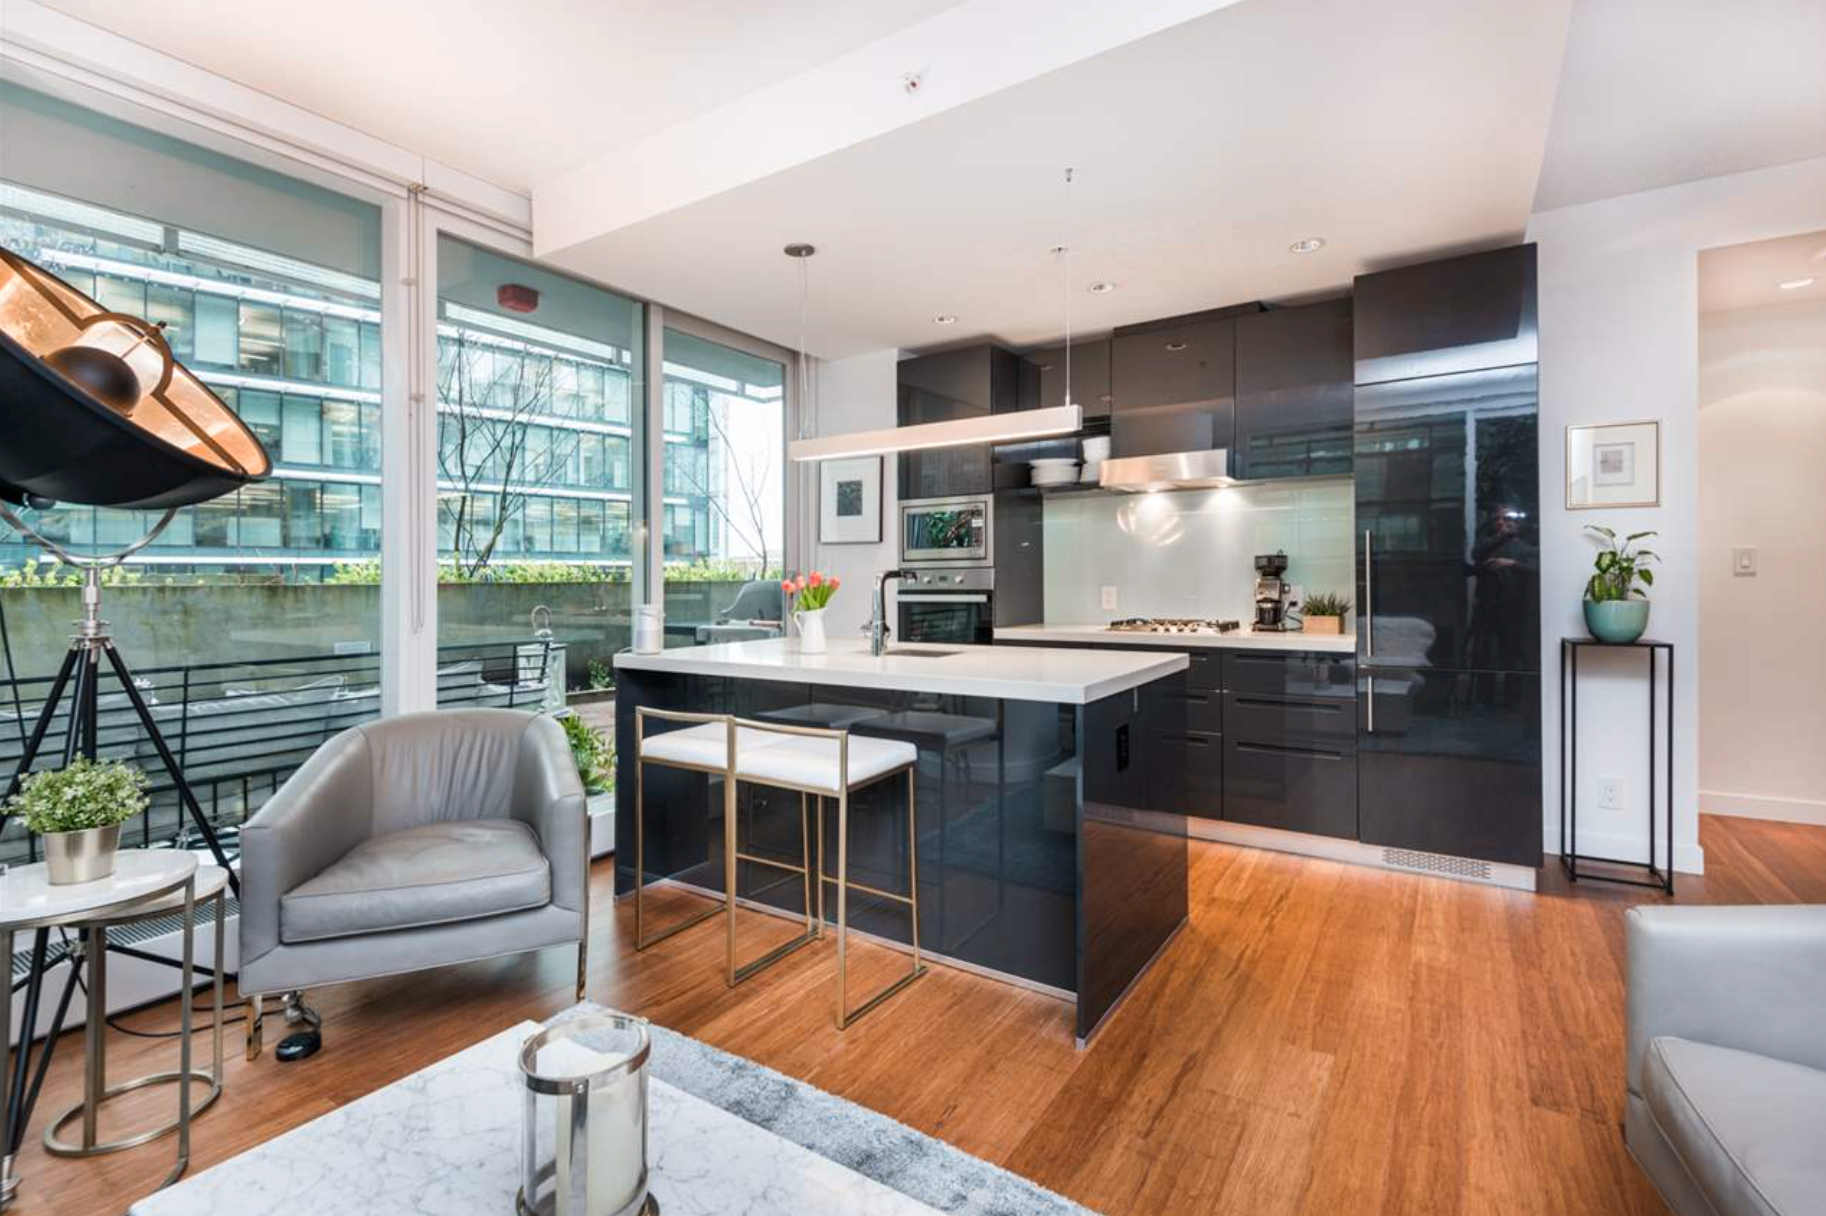 Main Photo: 606 777 Richards Street in Vancouver: Downtown VW Condo for sale (Vancouver West)  : MLS®# R2292008